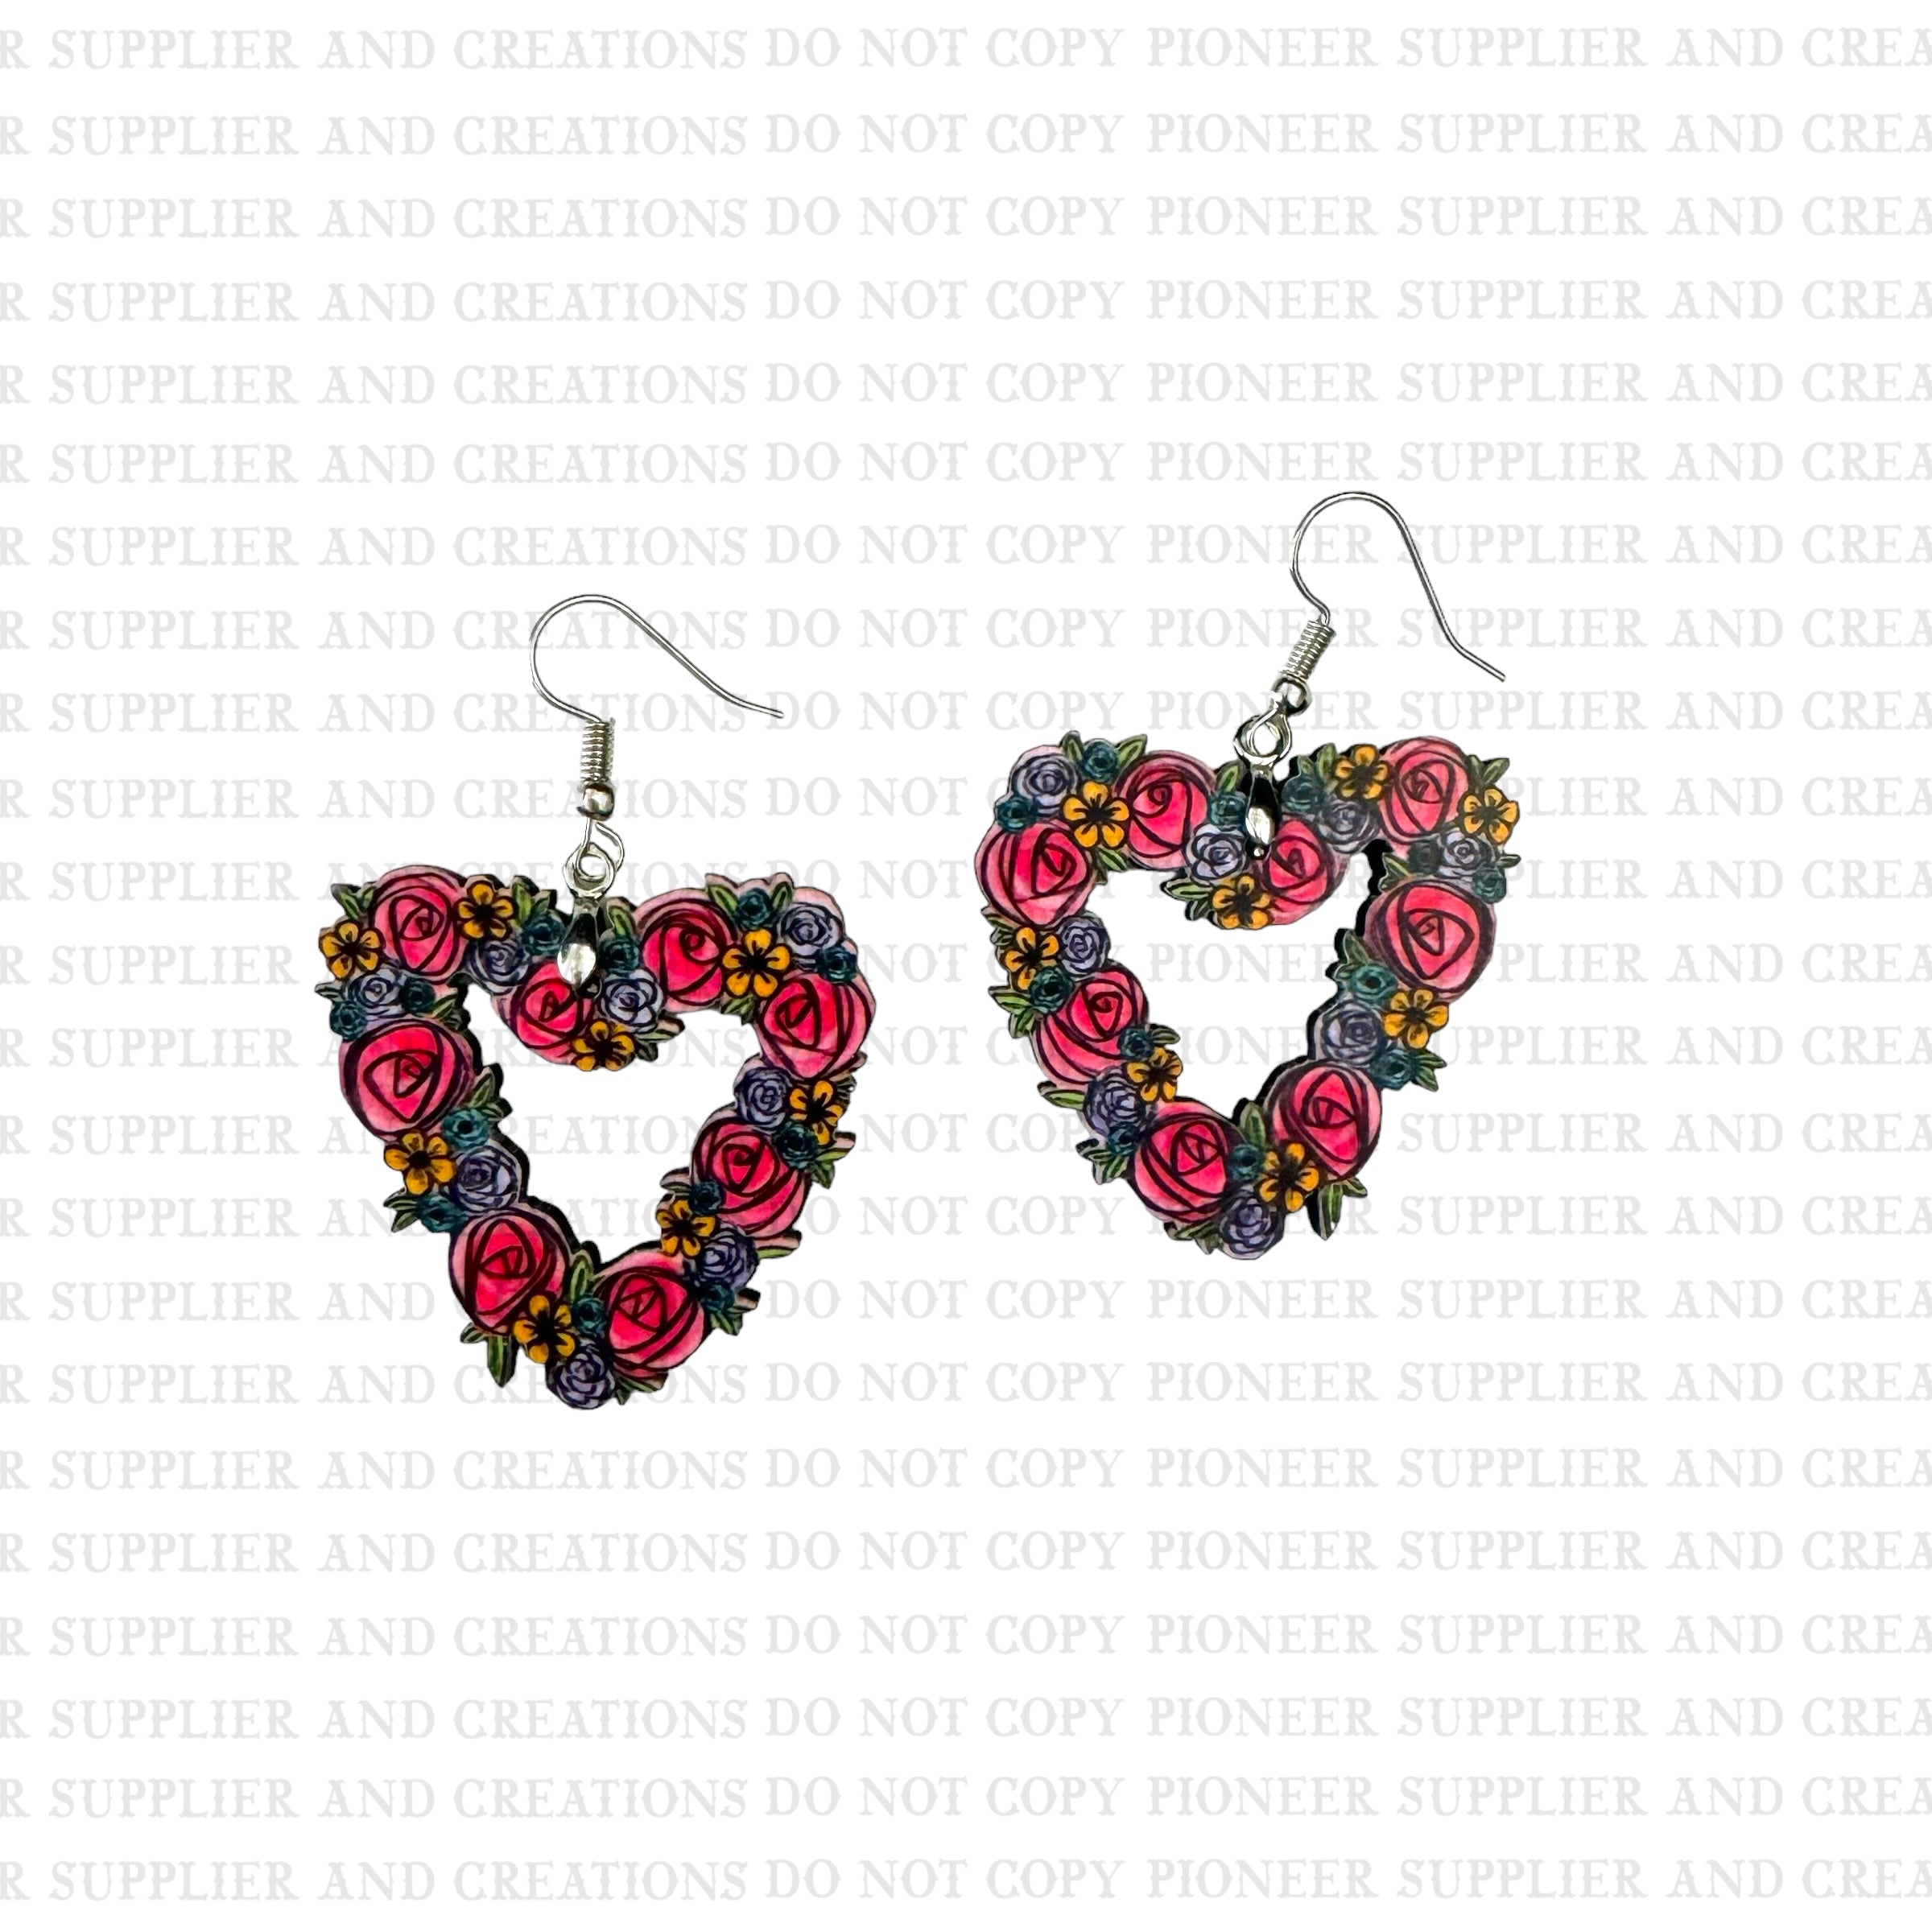 Heart with tassel option earrings size 1.5 inch - BULK PURCHASE 10pair – My  Sublimation Superstore